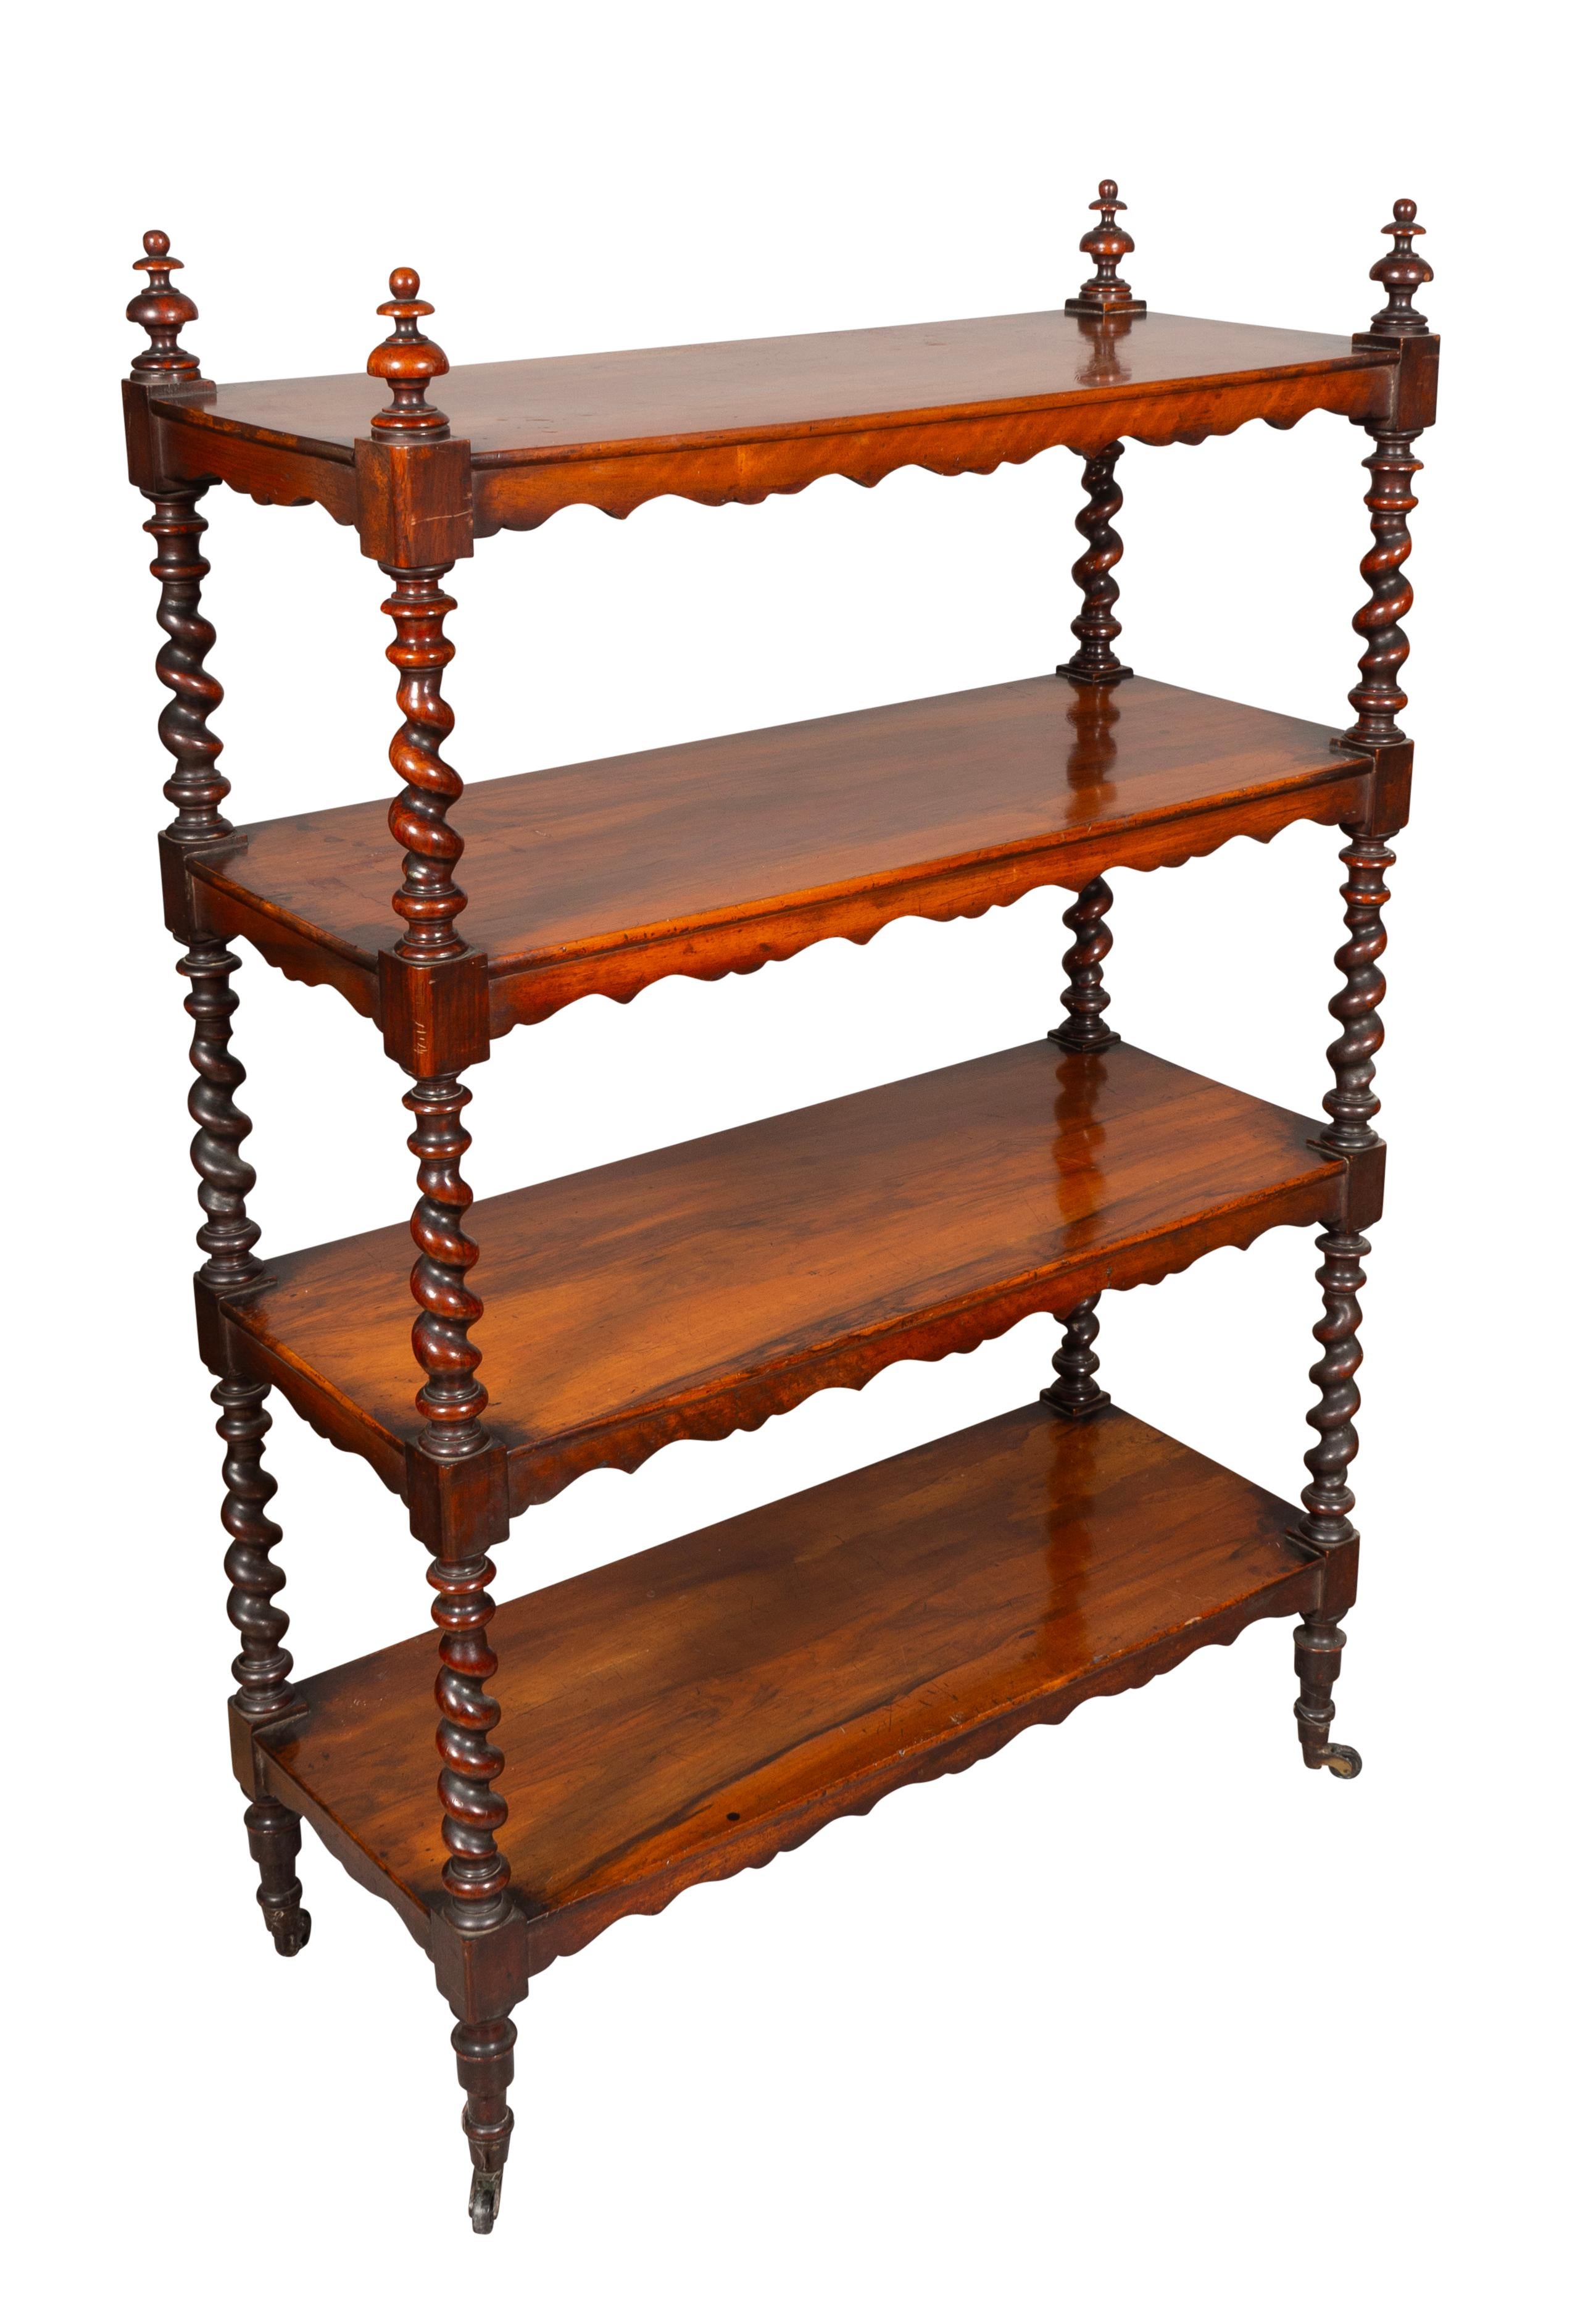 Rectangular top with corner finials over three conforming shelves supported with barley twist legs and uprights. Casters.